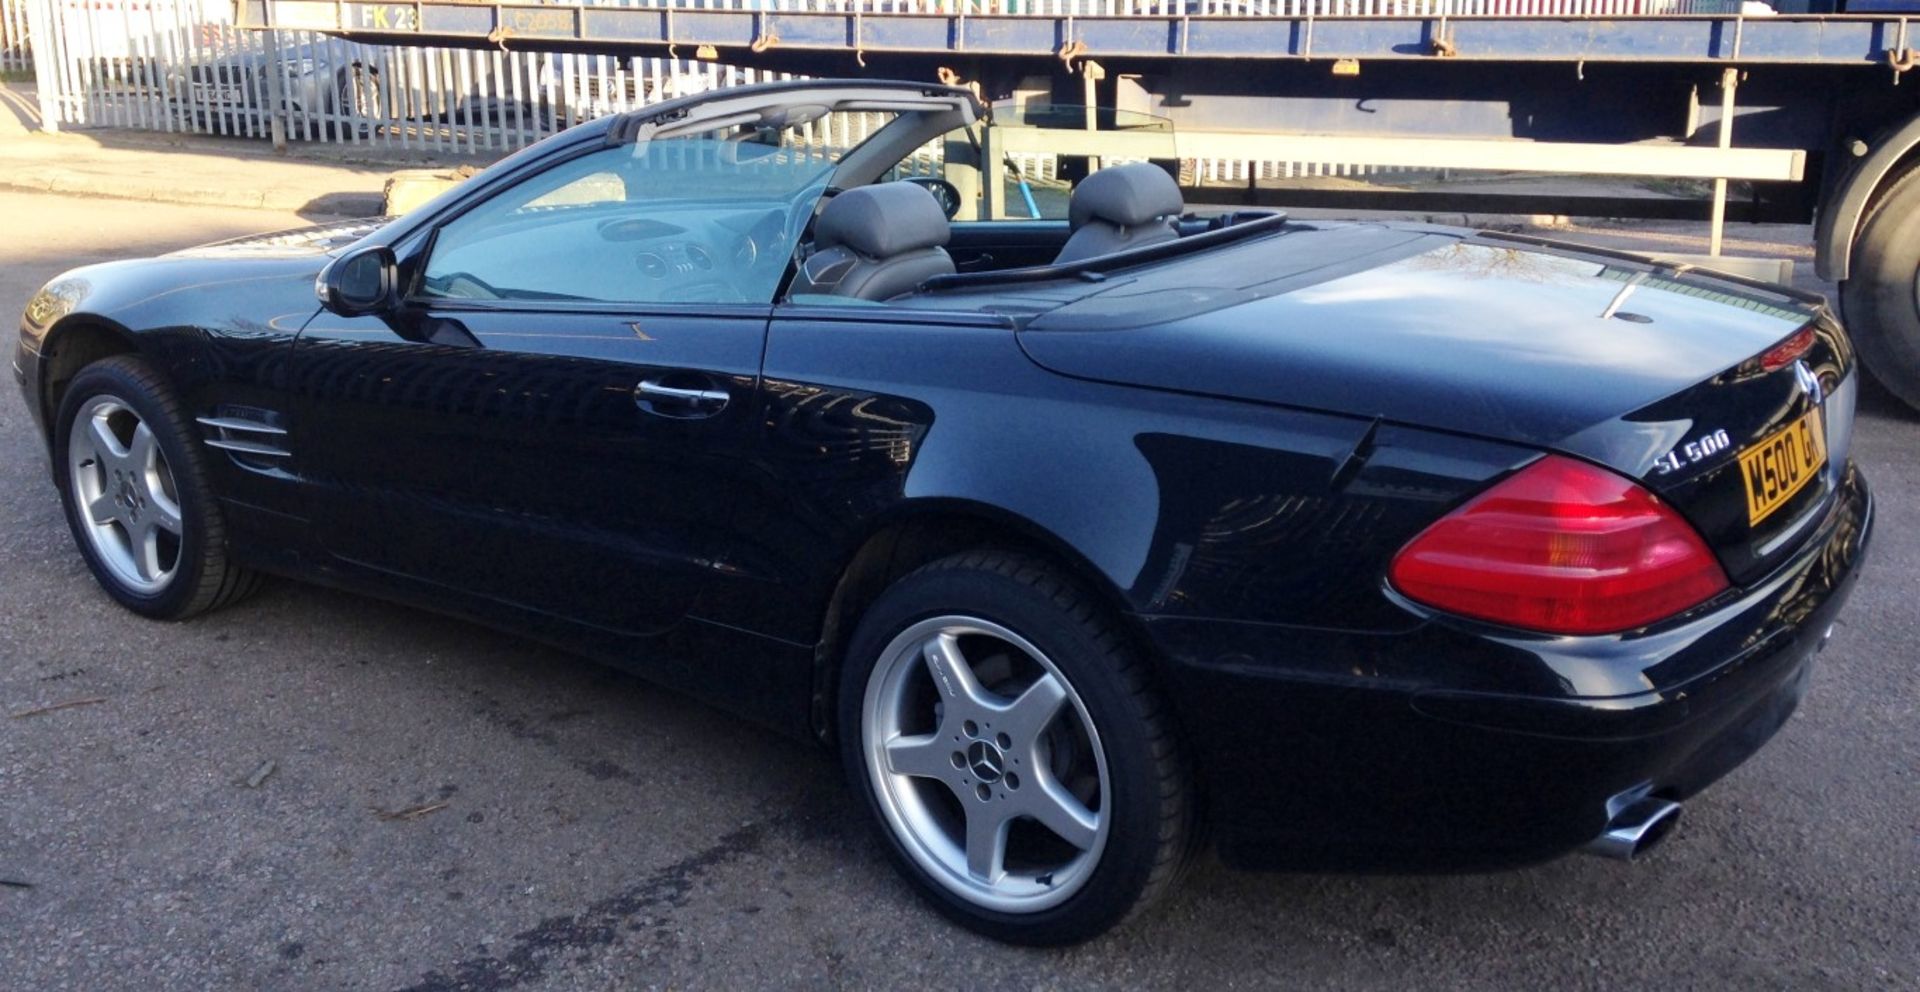 1 x Mercedes SL500 Automatic 5.0 Convertible - Petrol - Year 2002 - 94,500 Miles - Long MOT Expiry - Image 17 of 31